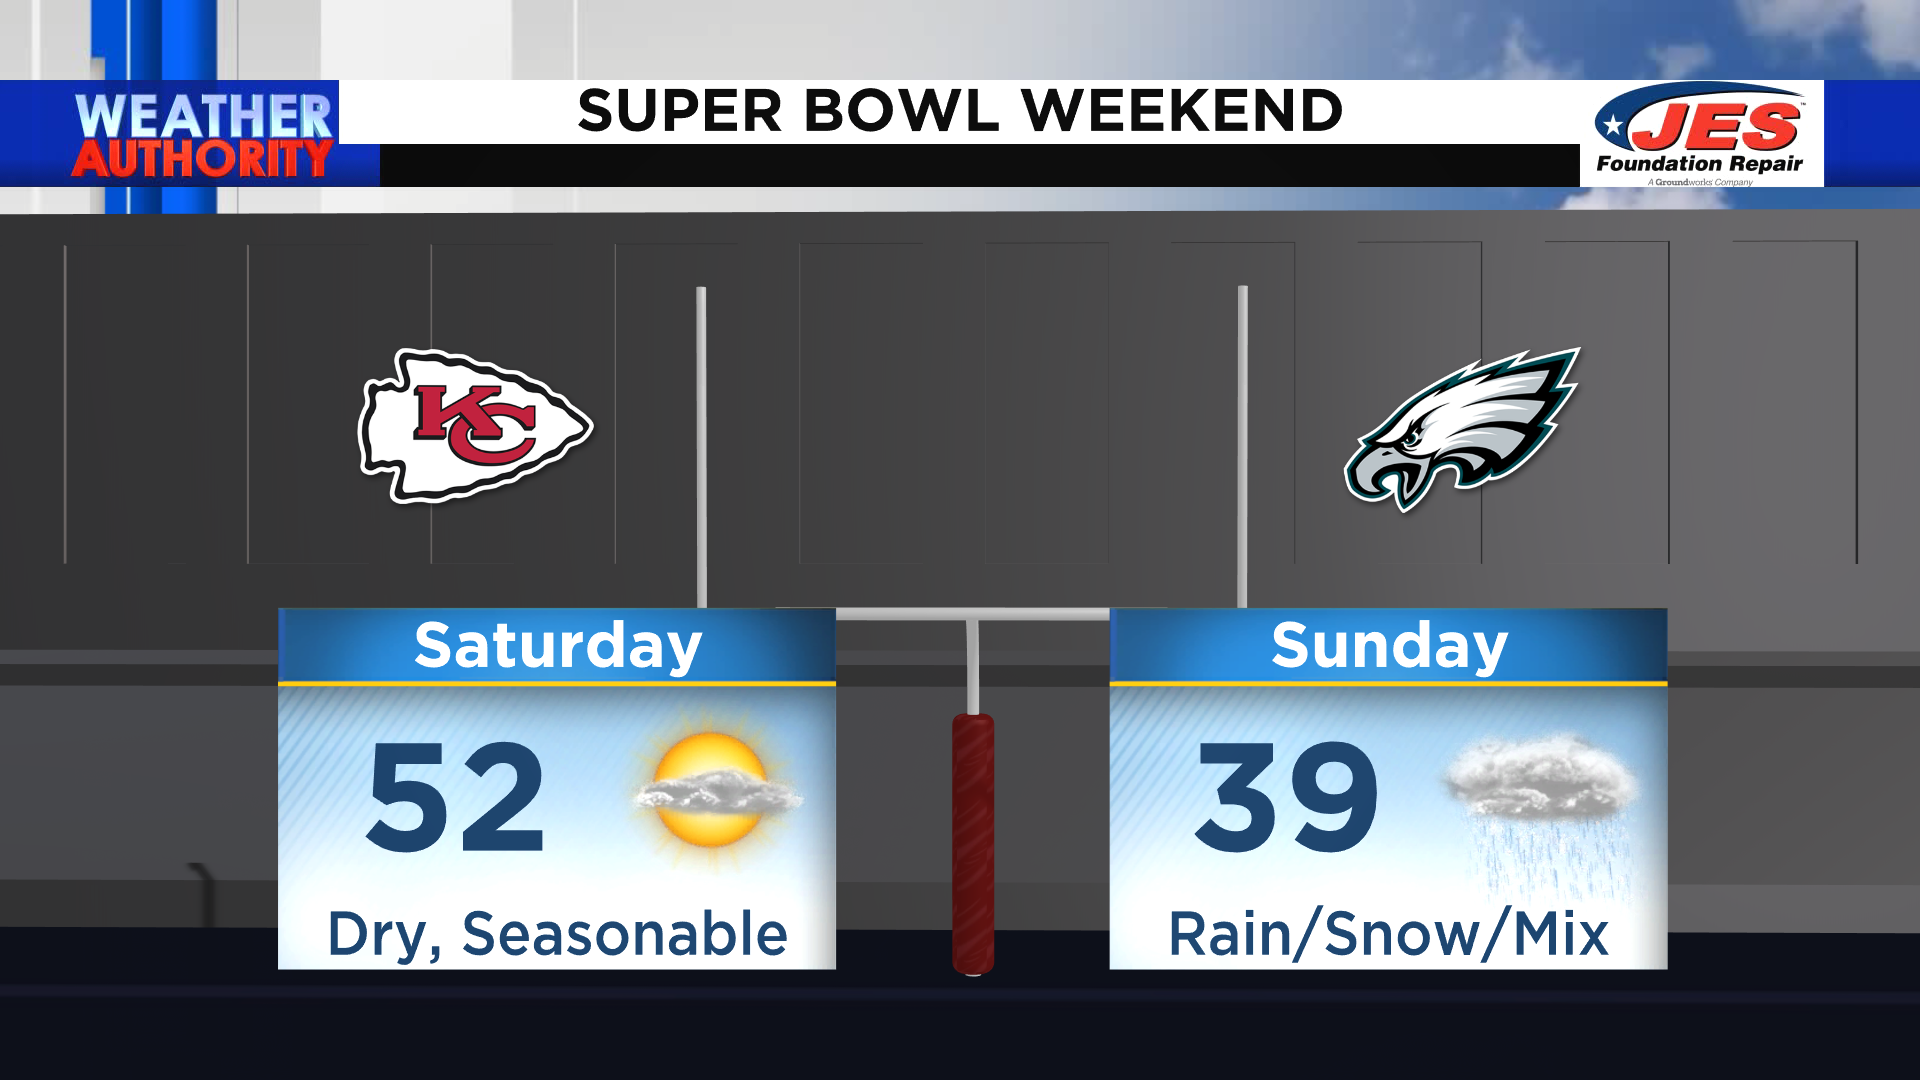 Cooler (and eventually wet and wintry) weather on tap for Super Bowl weekend